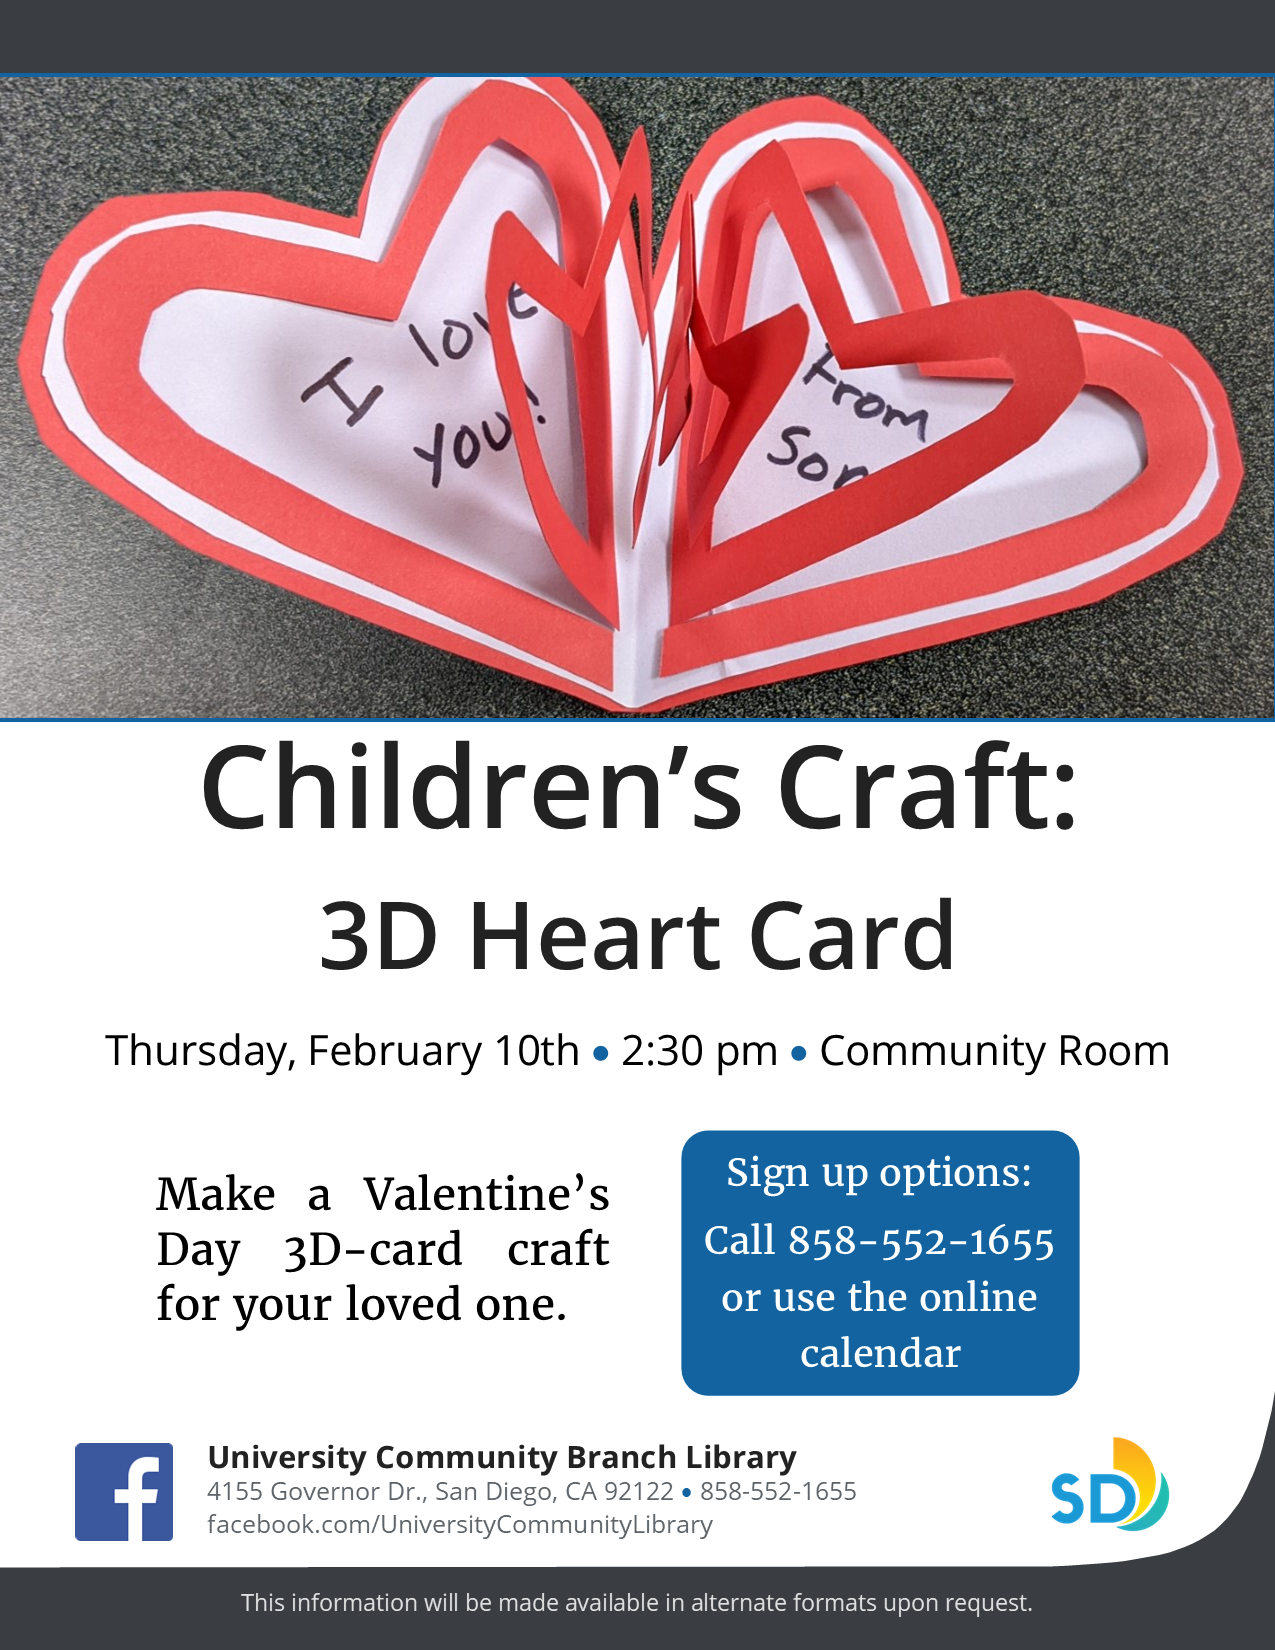 Flyer with heart card image and program description.